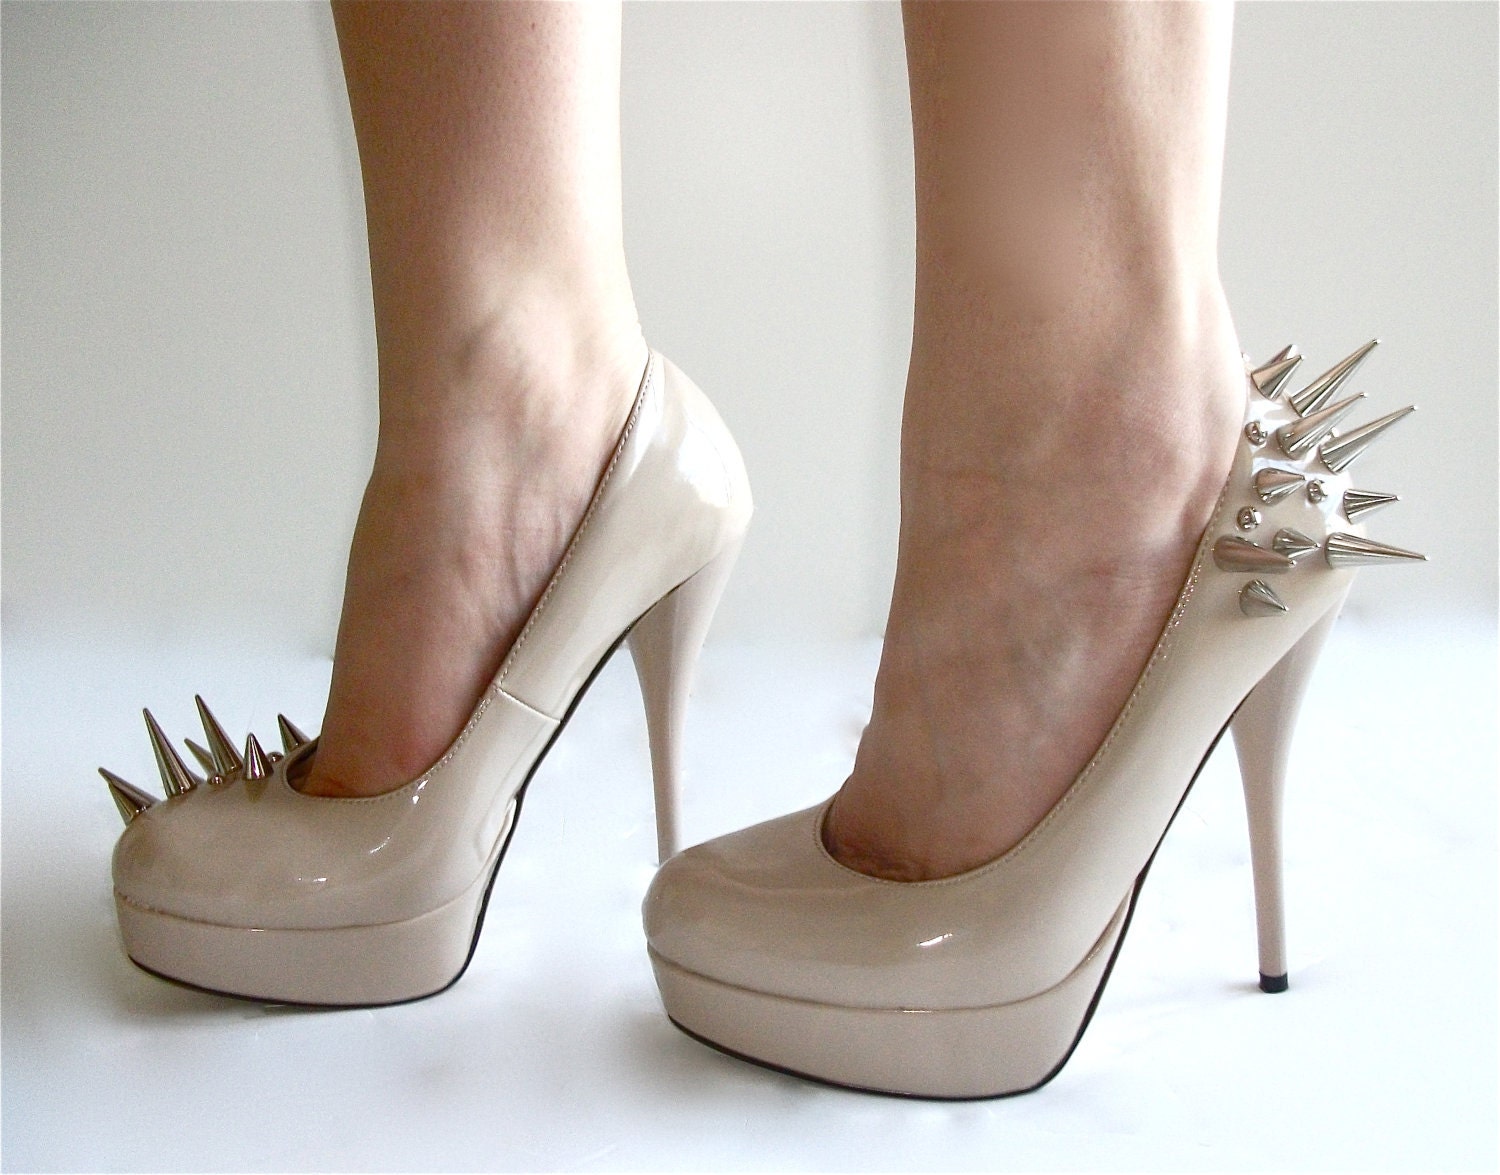 Asymmetrical Spiked Patent Leather Pumps - Nude